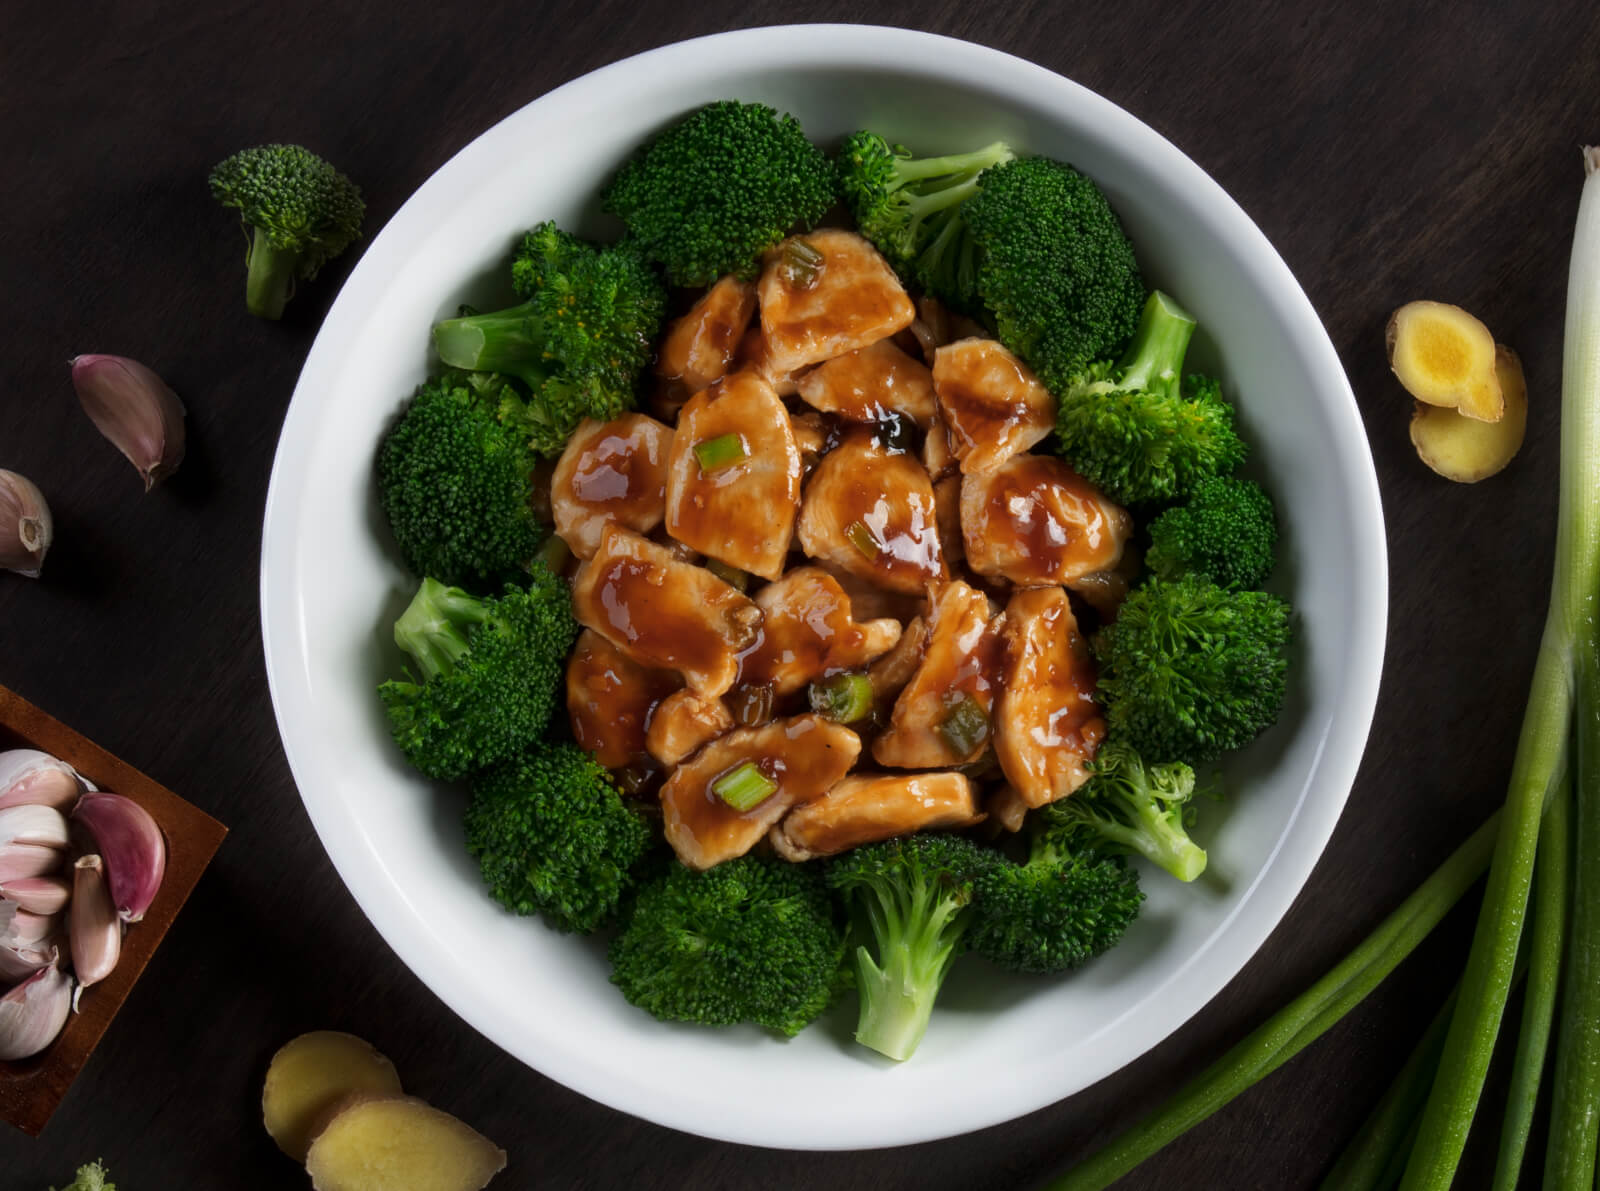 Ends today! P.F. Chang’s: Enjoy FREE Ginger Chicken with entrée purchase